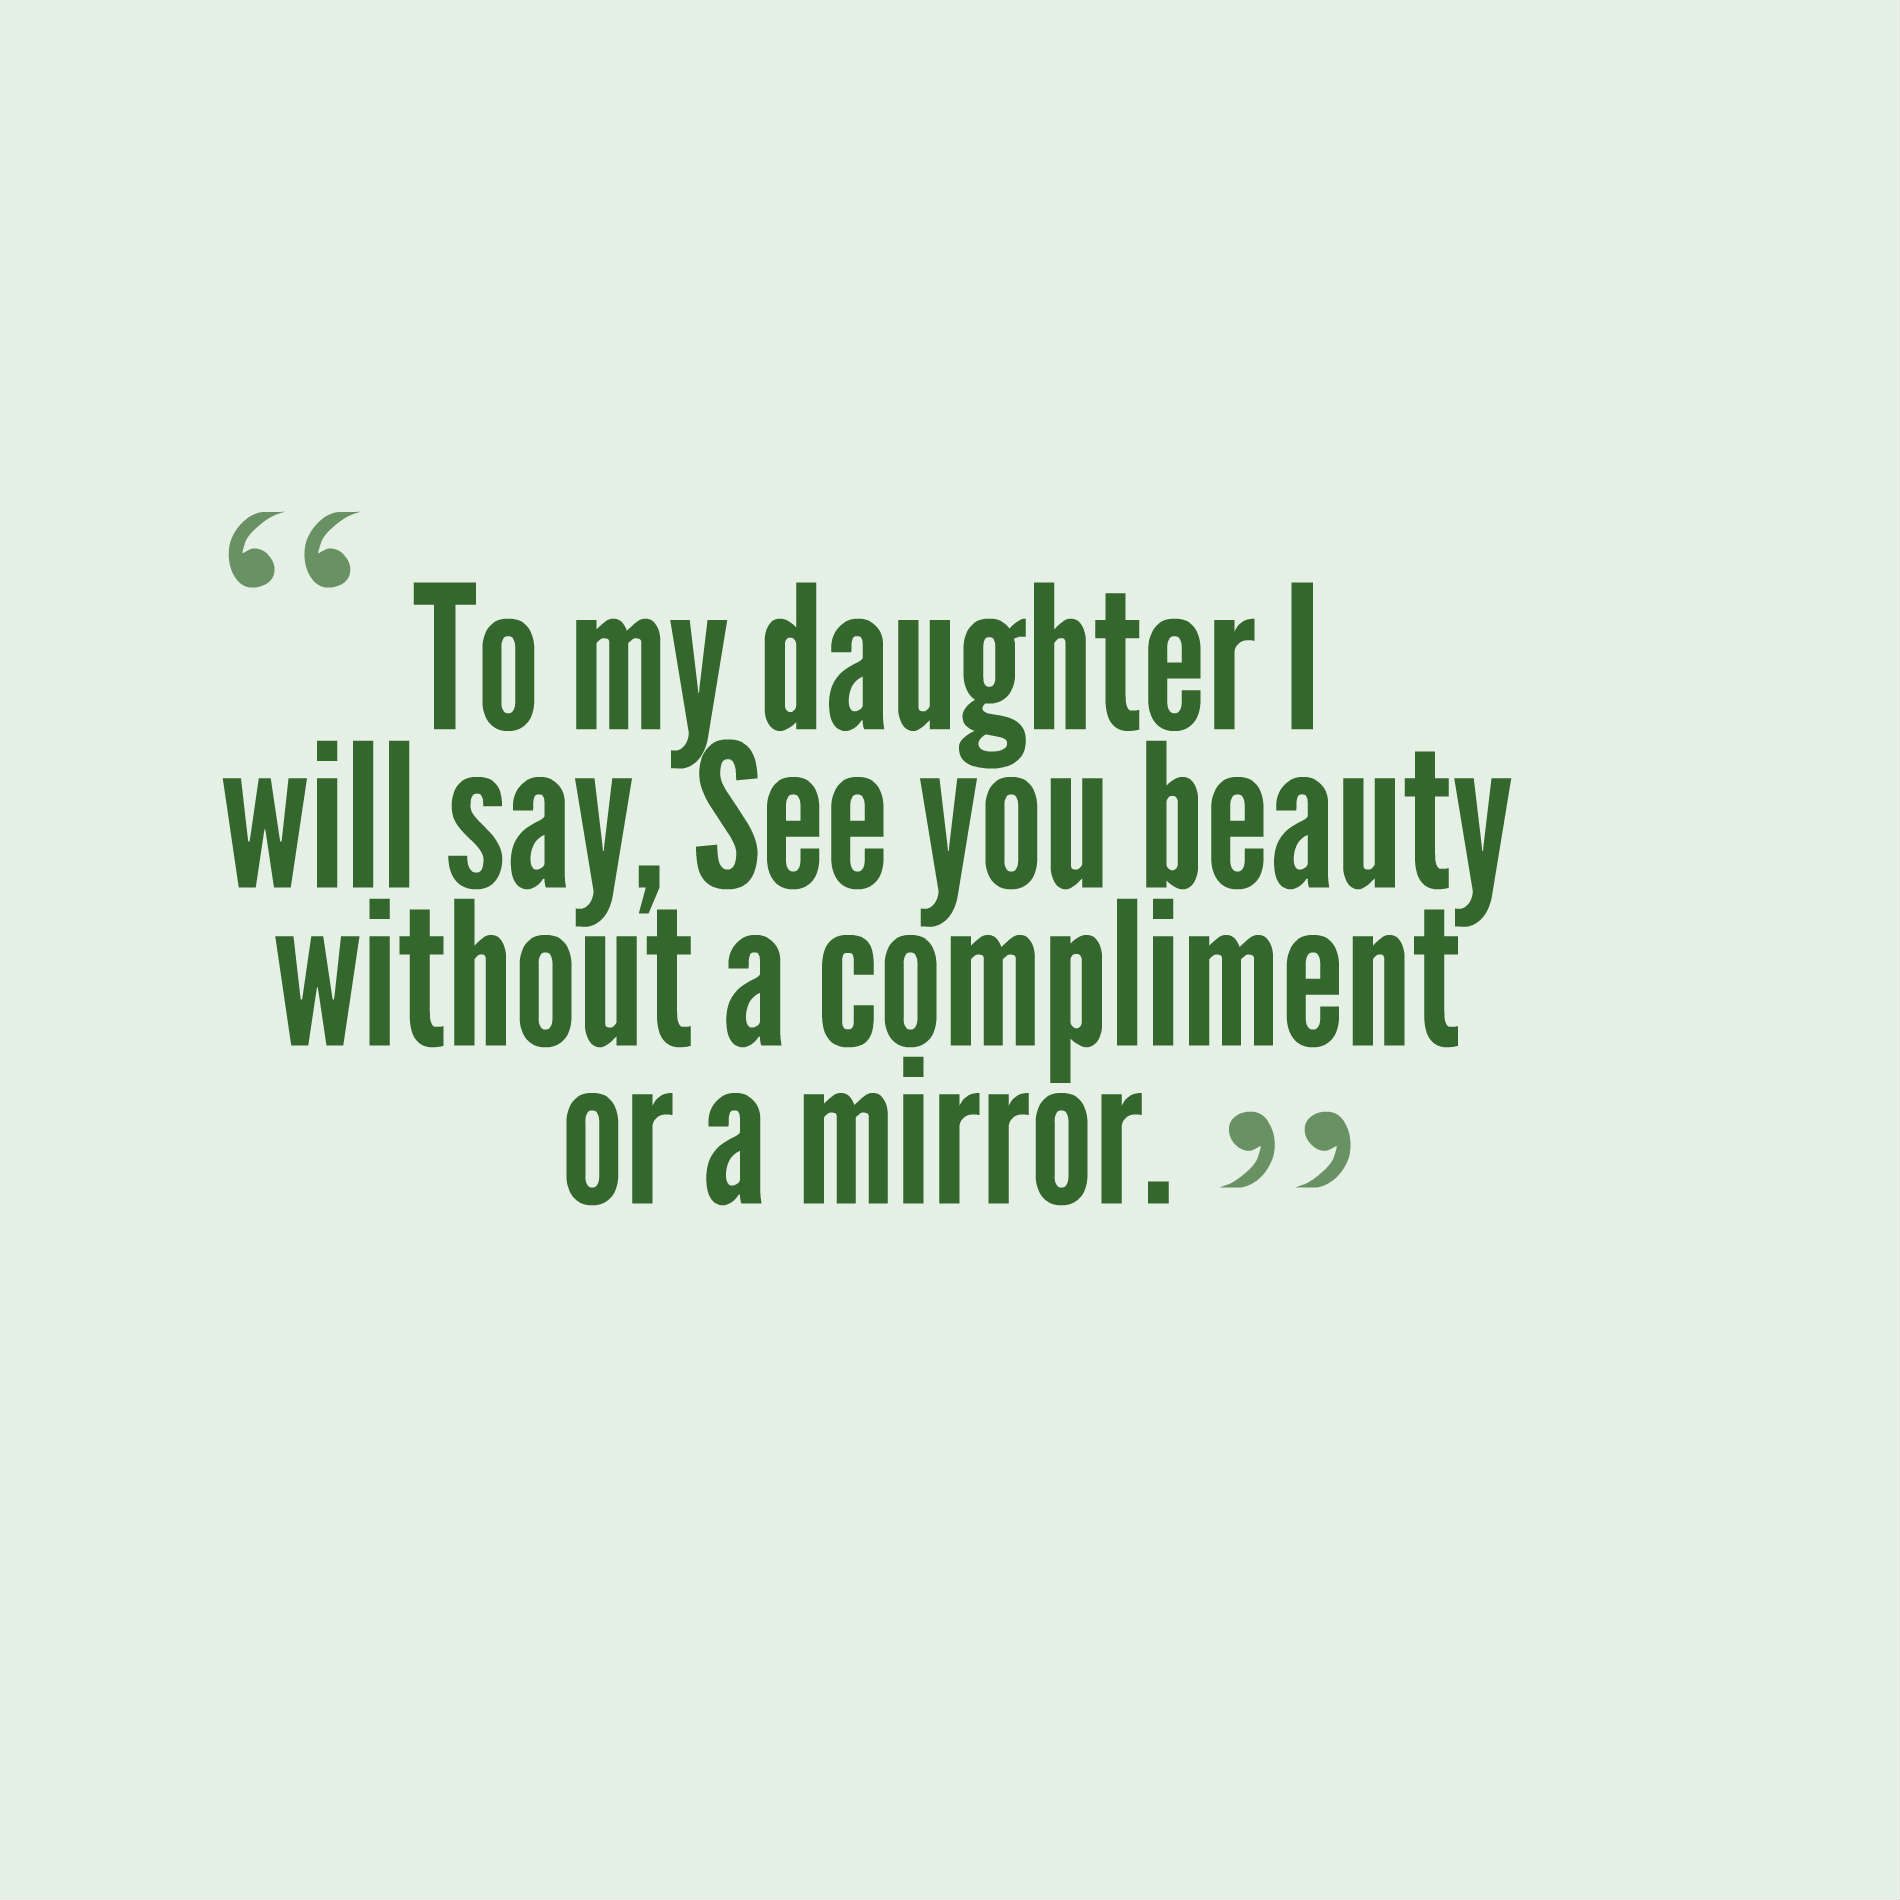 To my daughter I will say, See you beauty without a compliment or a mirror.